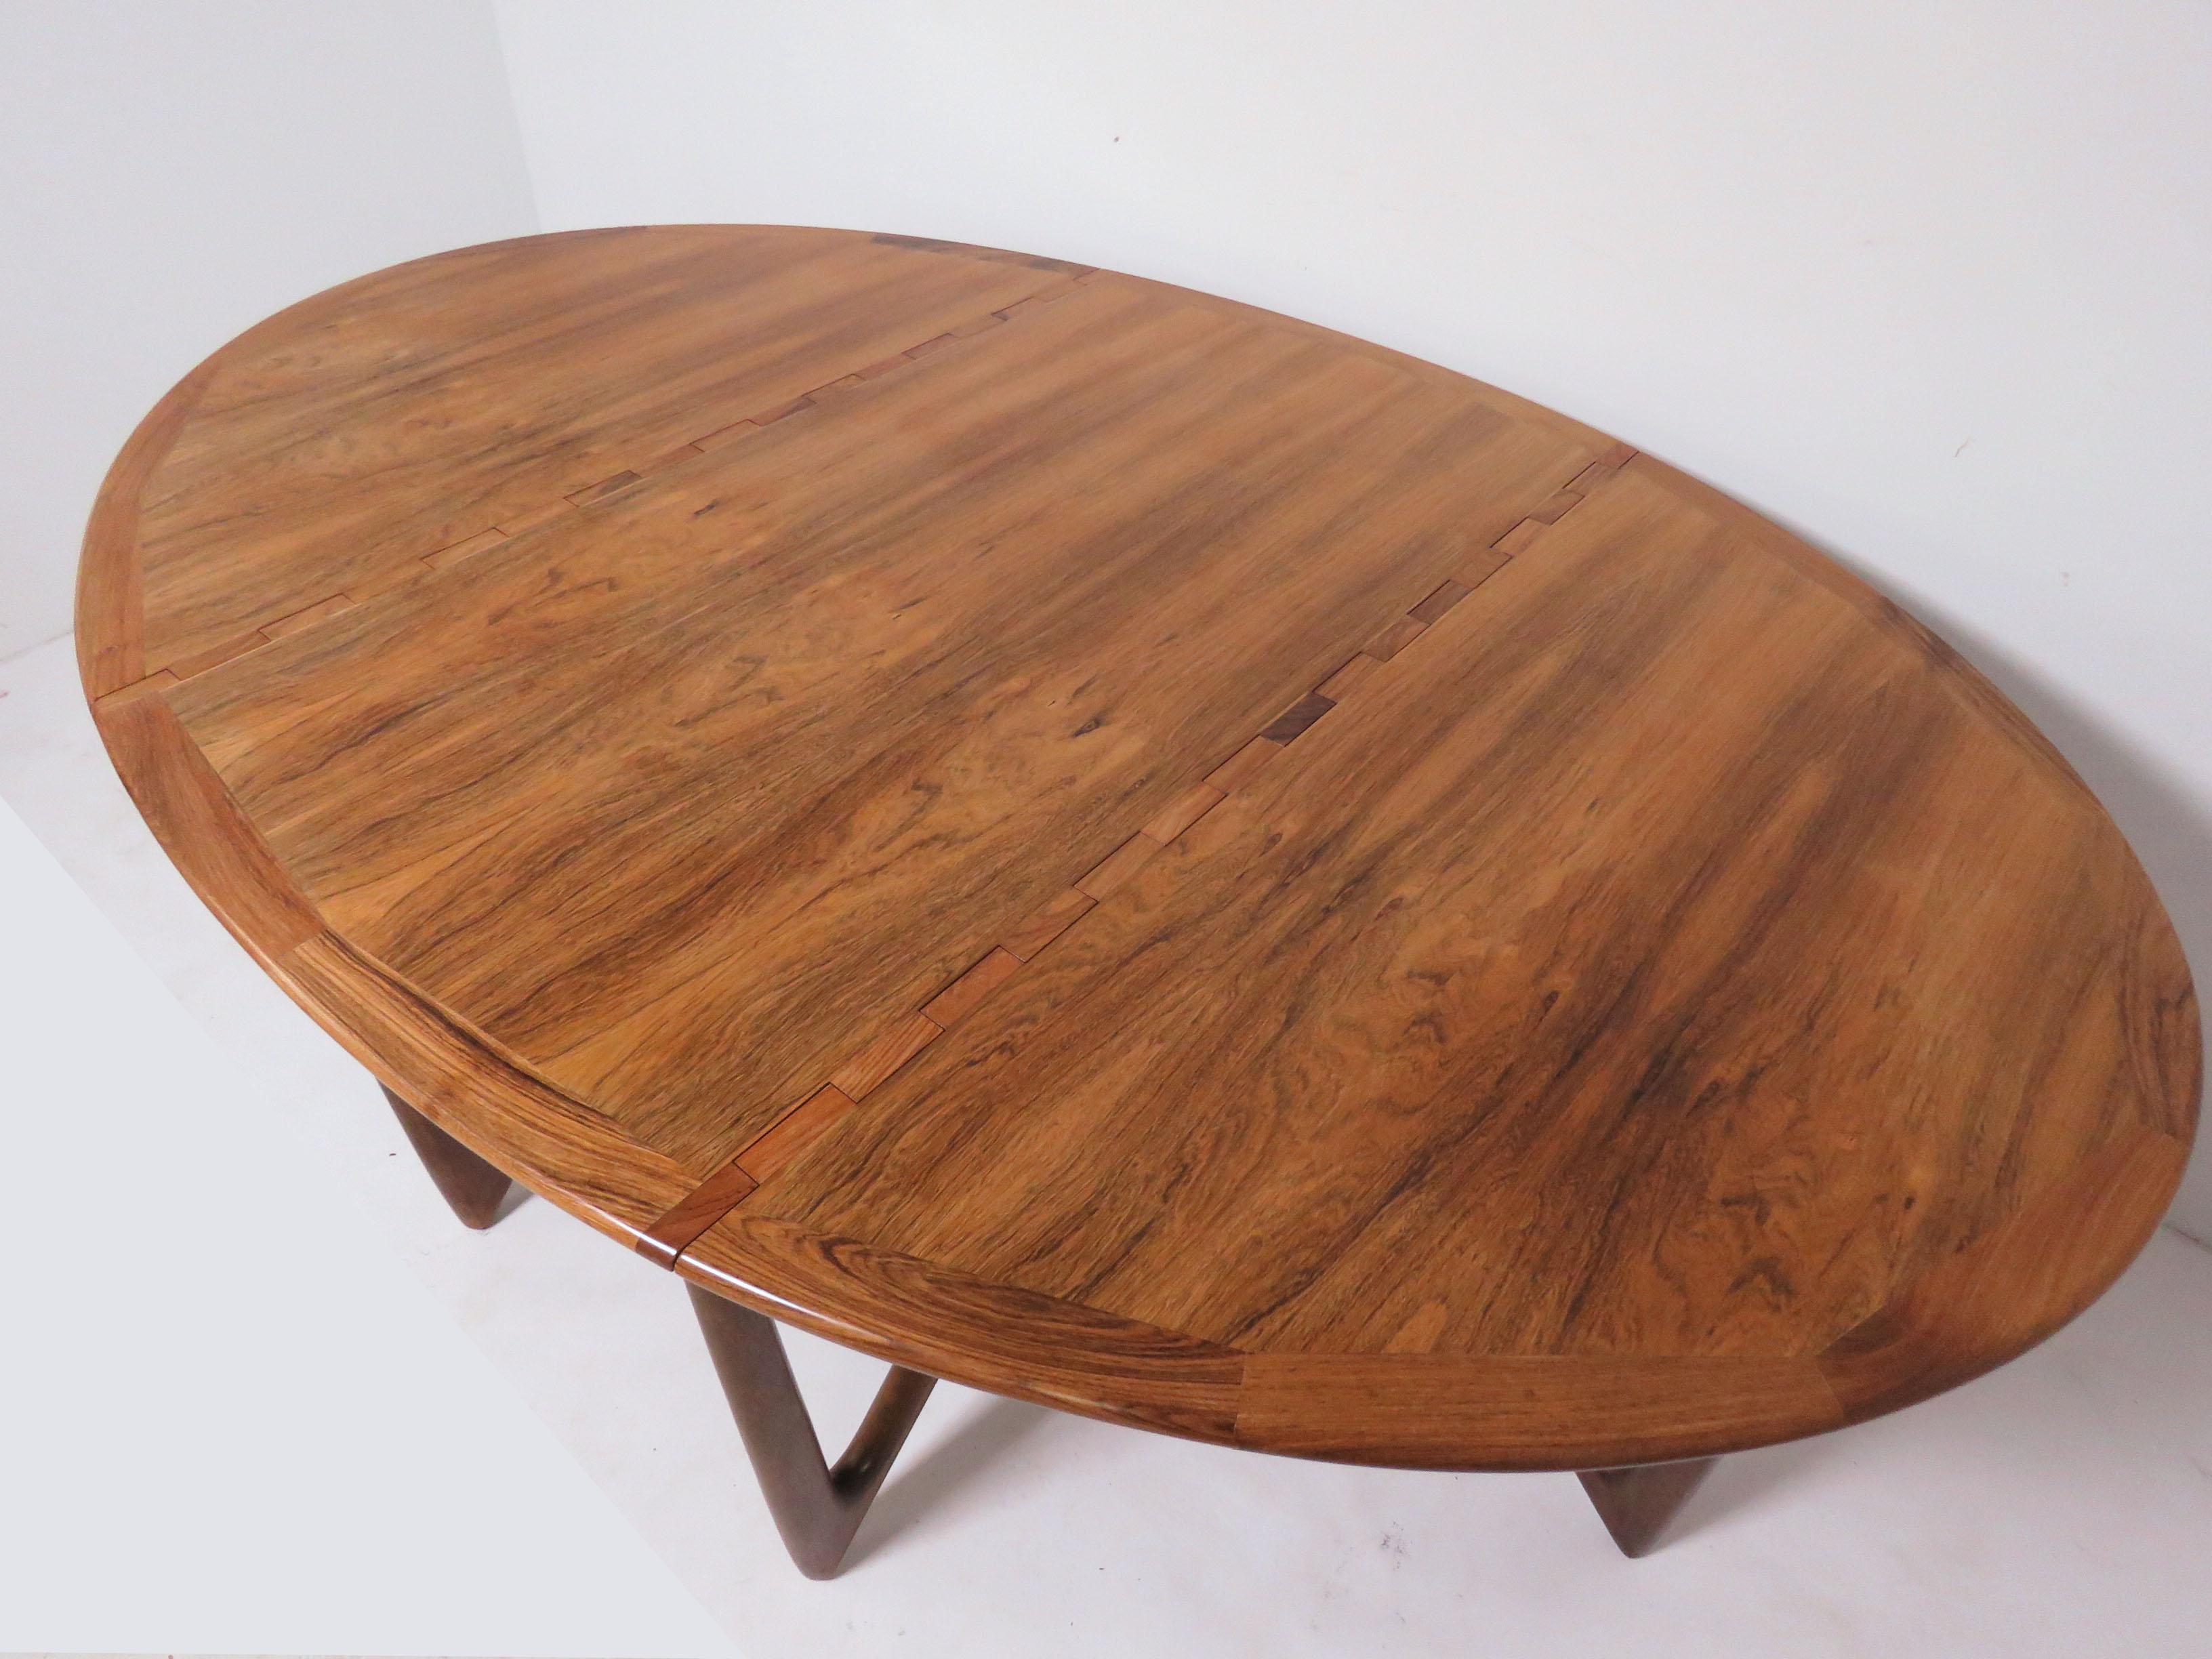 Rosewood drop-leaf gate leg dining table with sculptural 